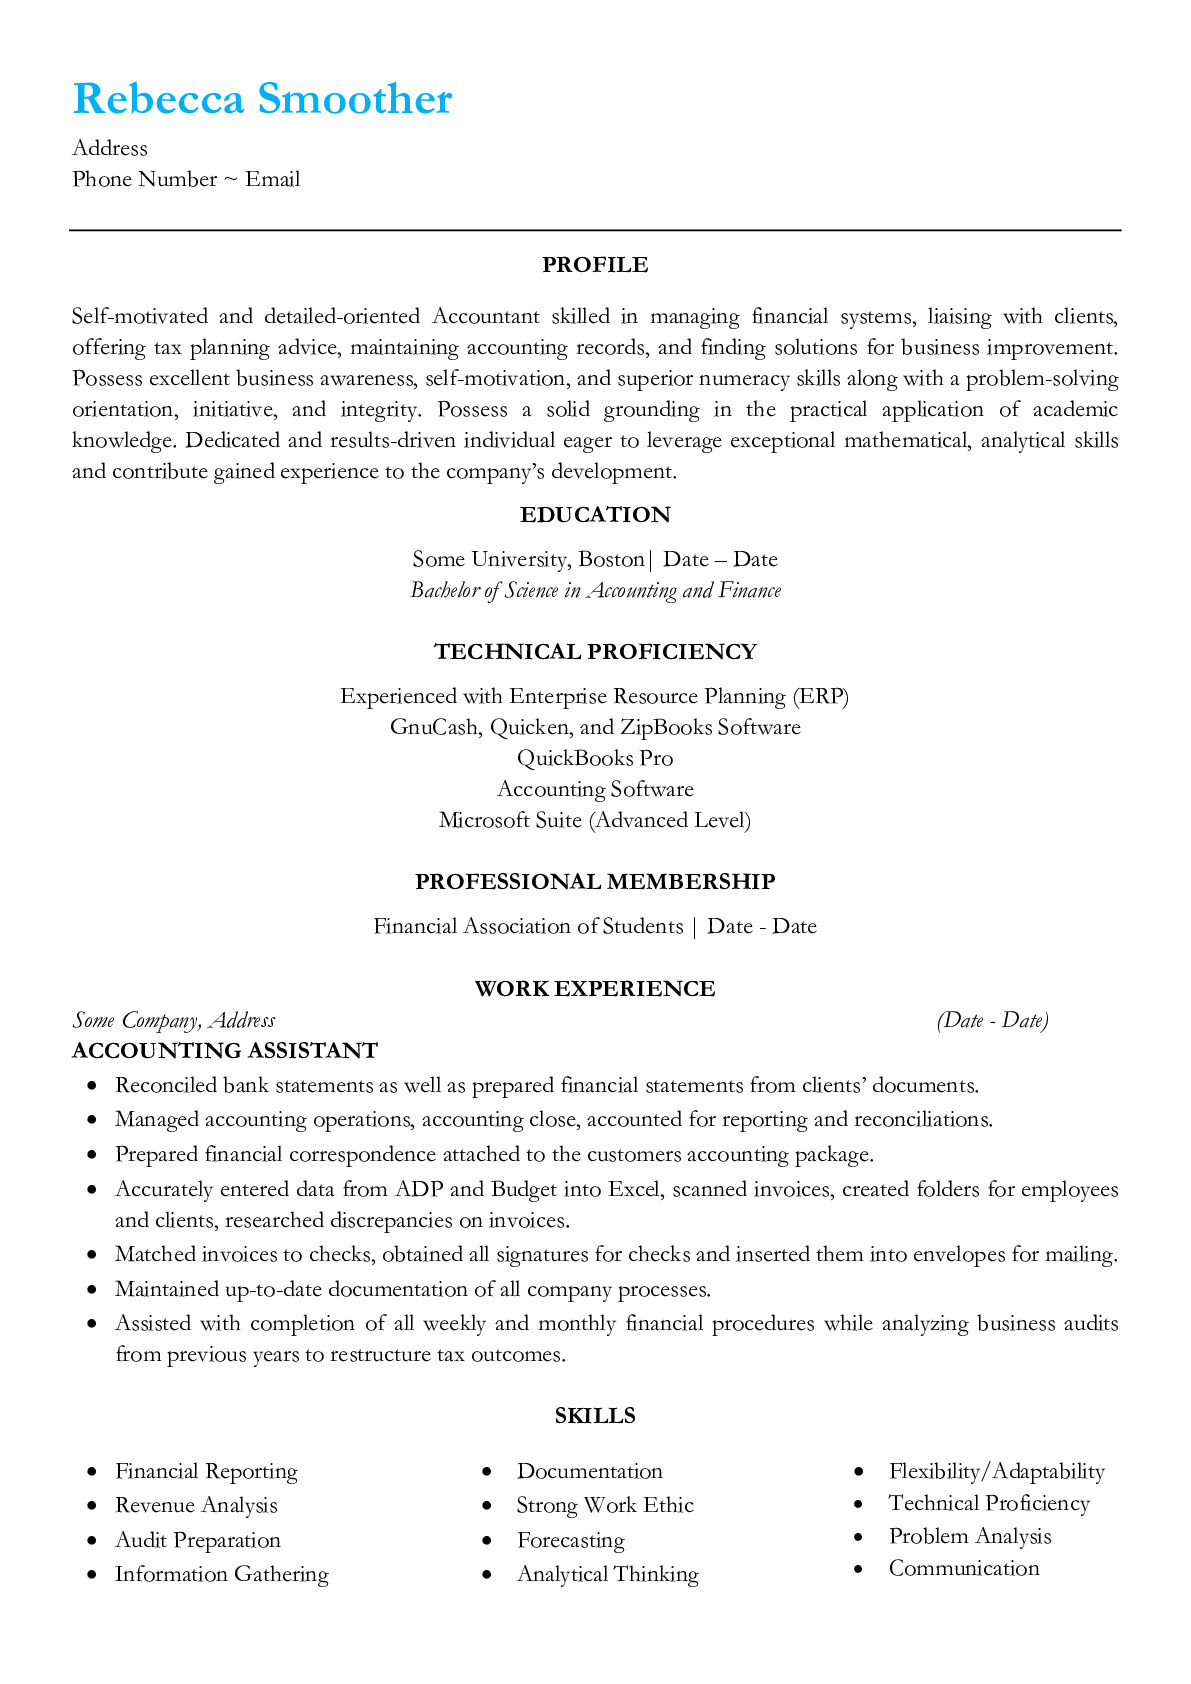 Accounting Assistant Resume Sample - Download for Free